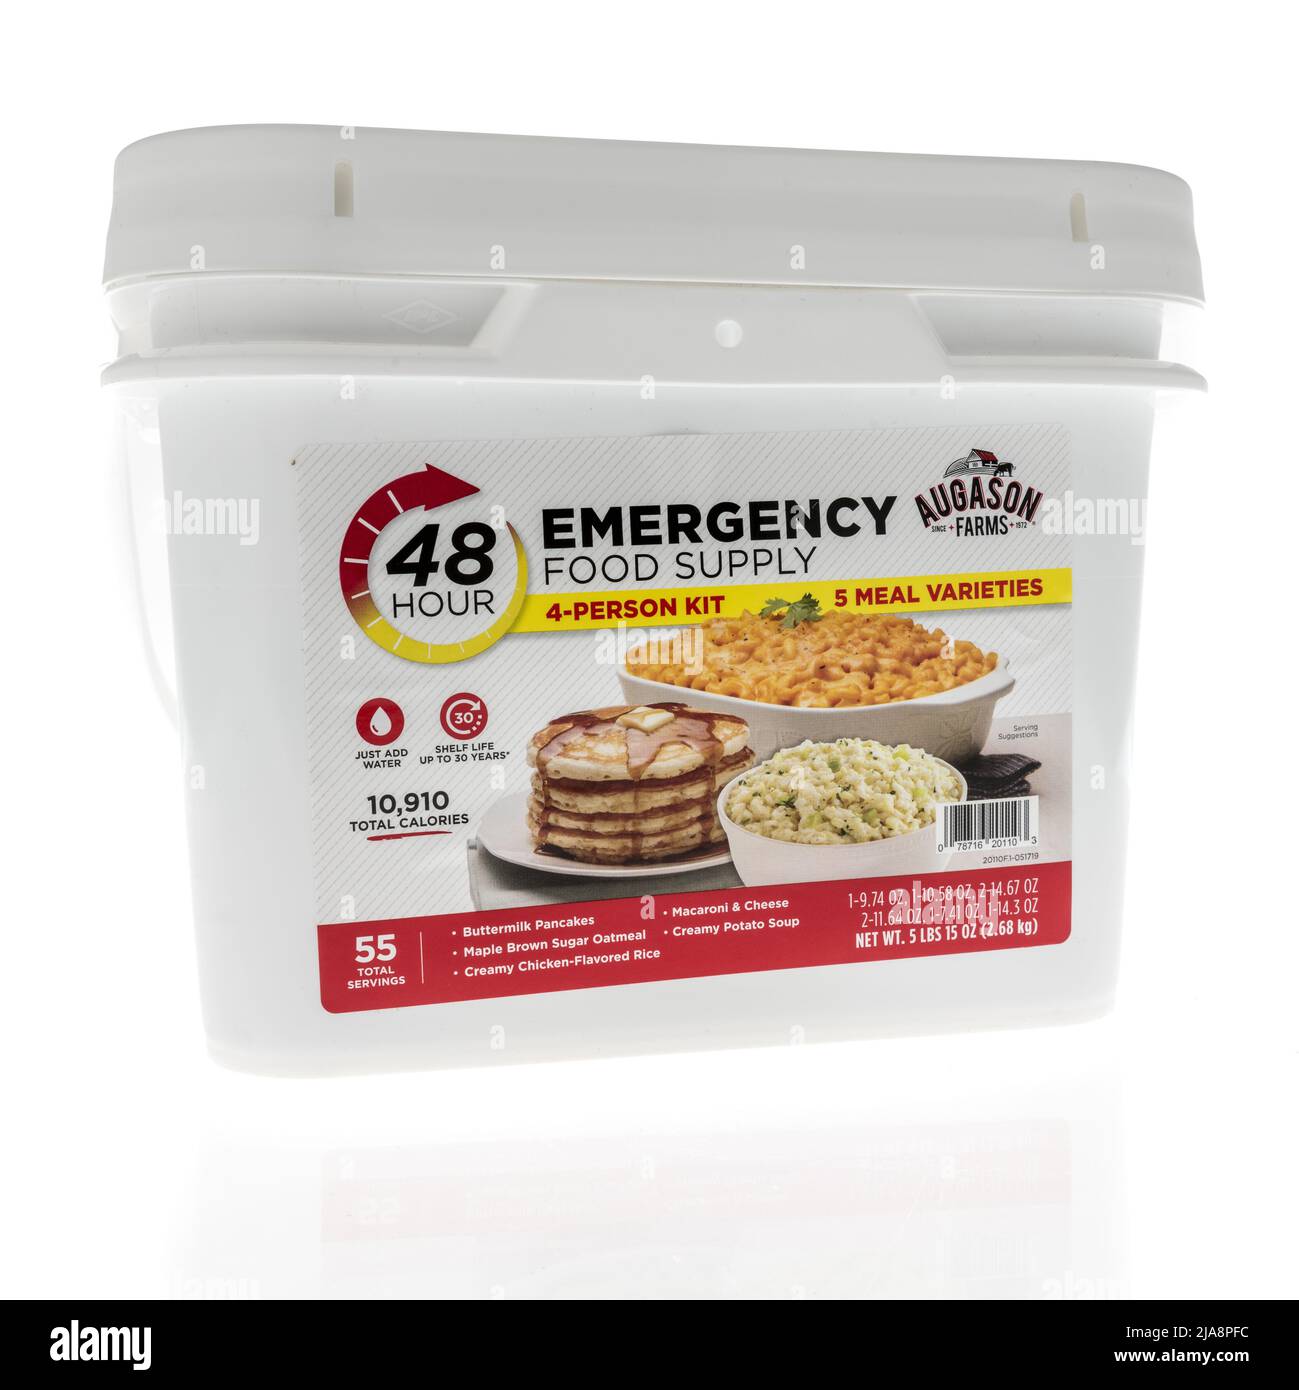 Winneconne, WI -23 April 2022: A package of Augason farms emergency food supply on an isolated background Stock Photo